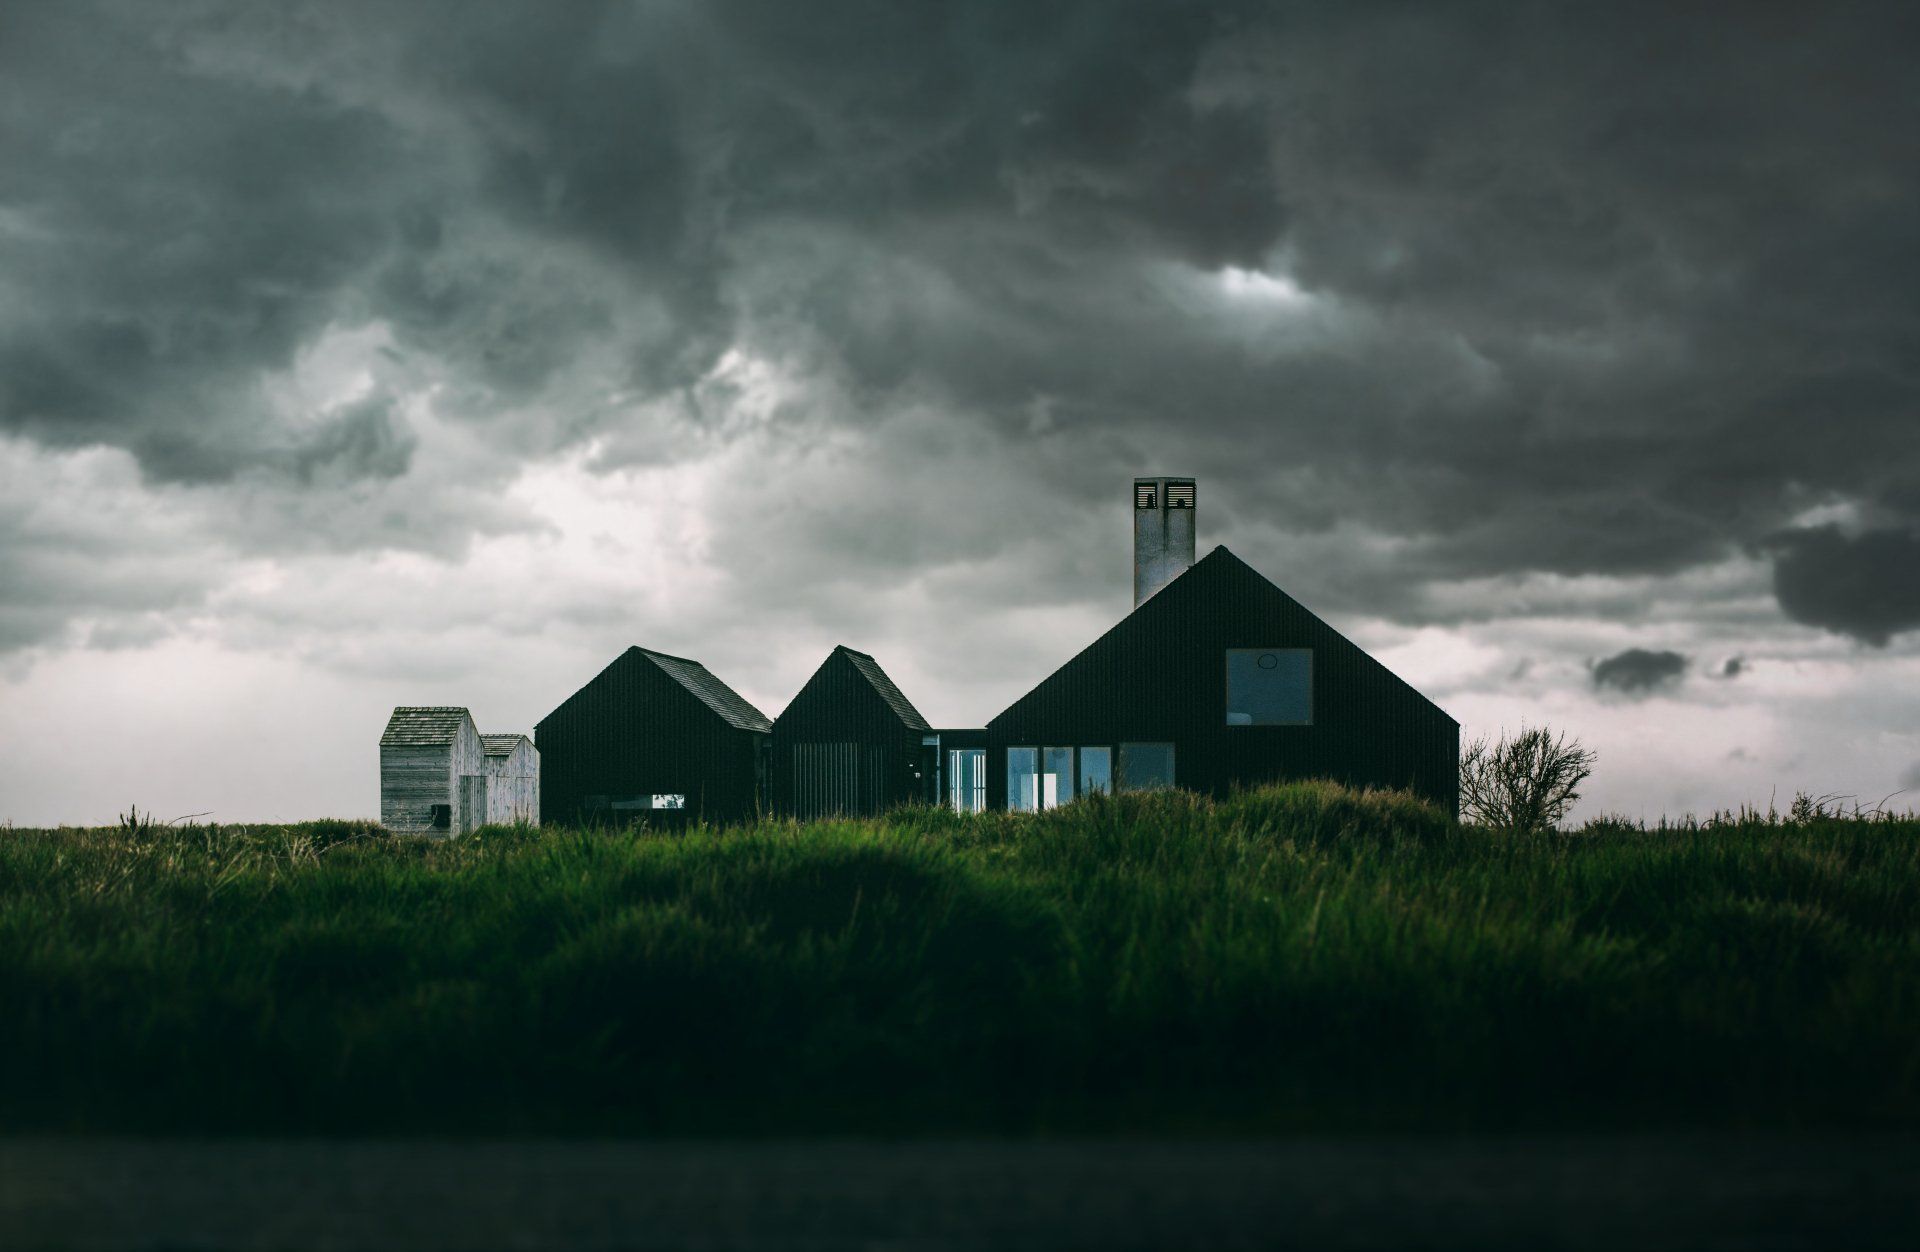 Ominous photo of a house surrounded by dark clouds